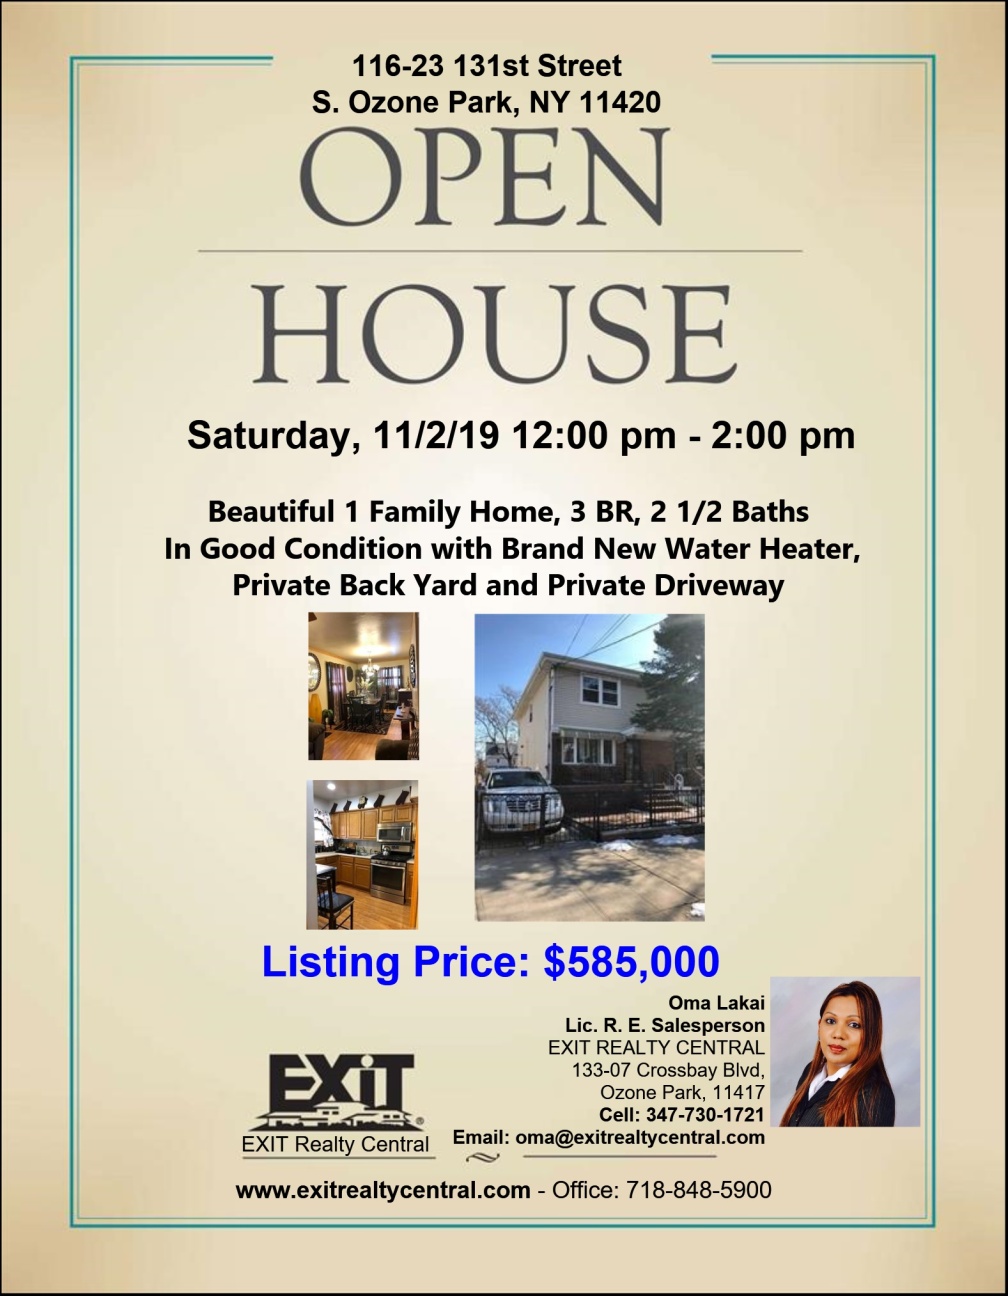 Open House in S. Ozone Park 11/2 from 12-2pm